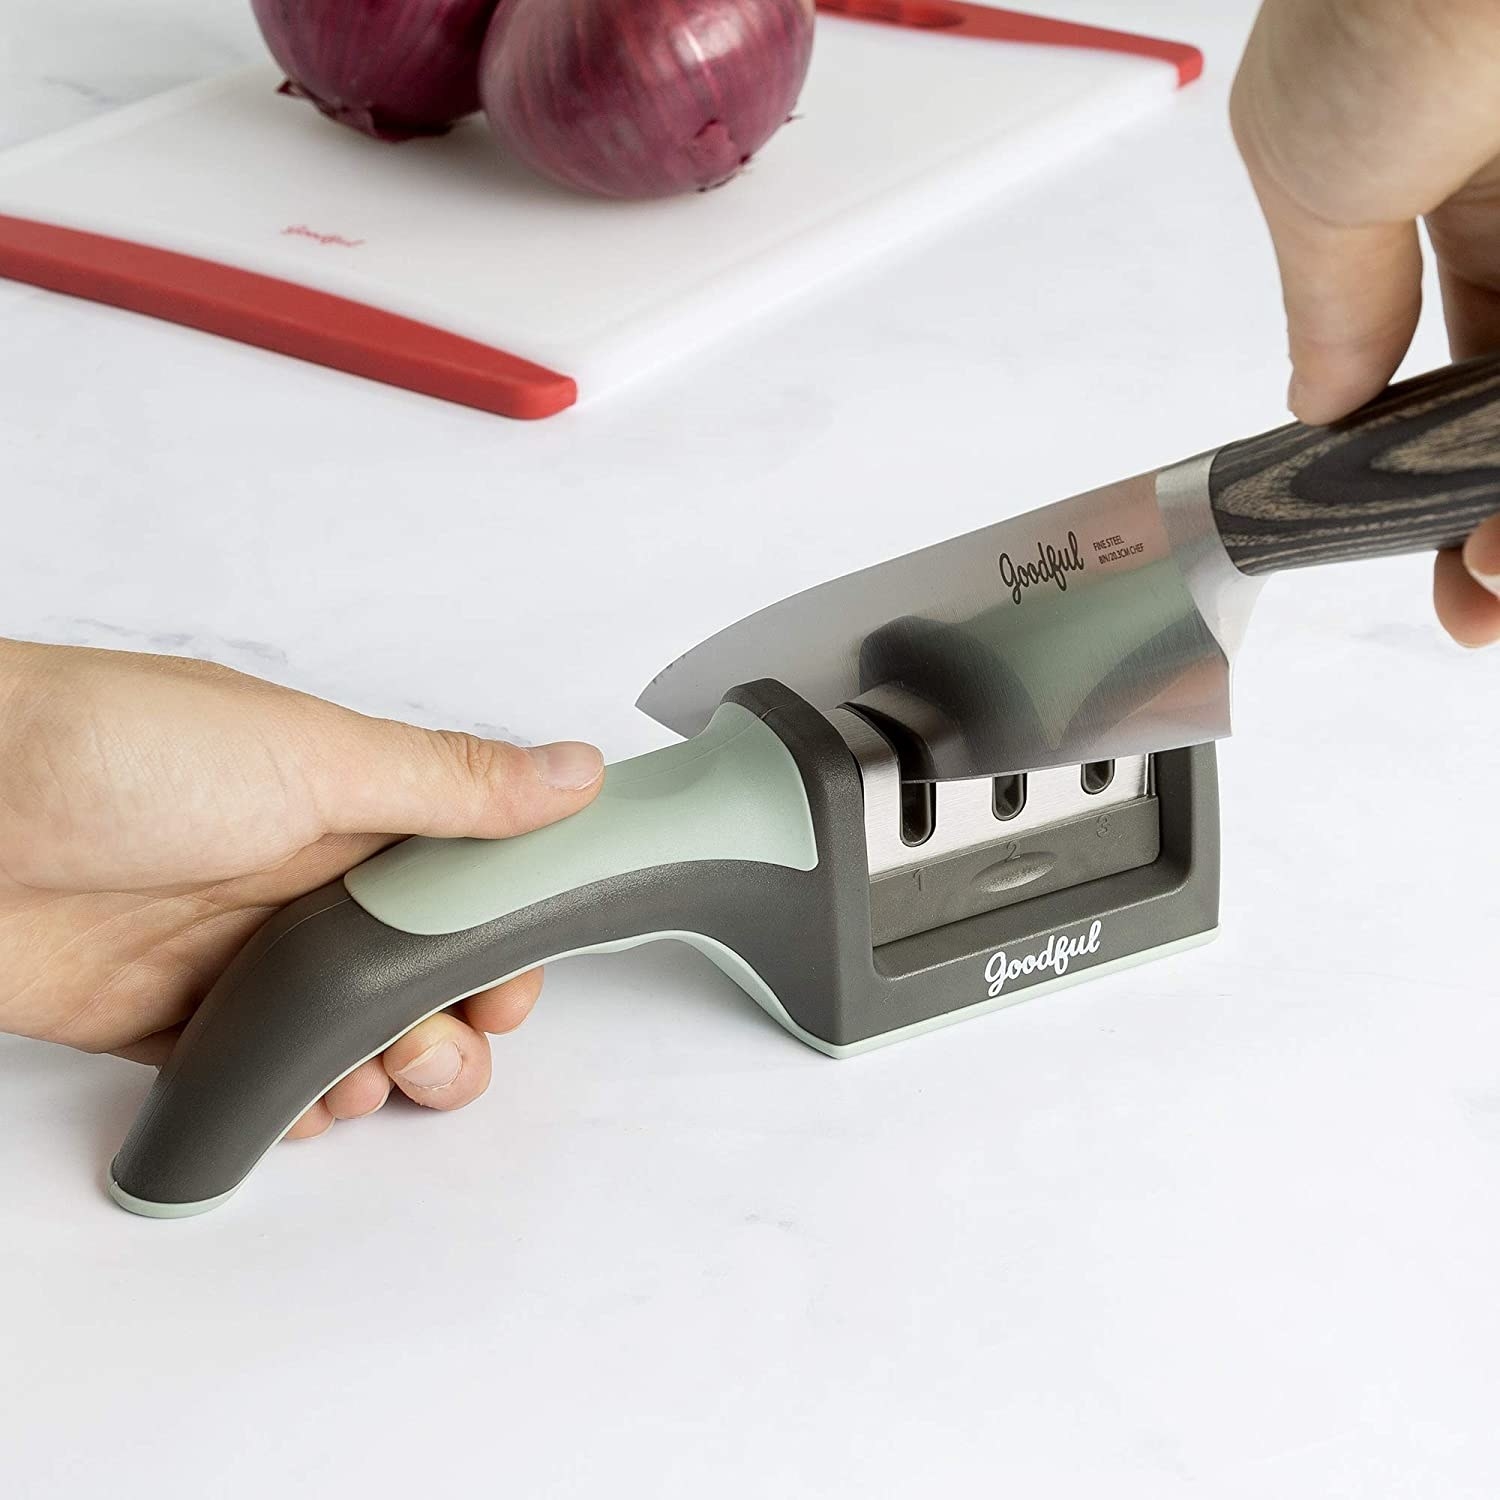 Hand uses green Goodful knife sharpener to sharpen large silver knife